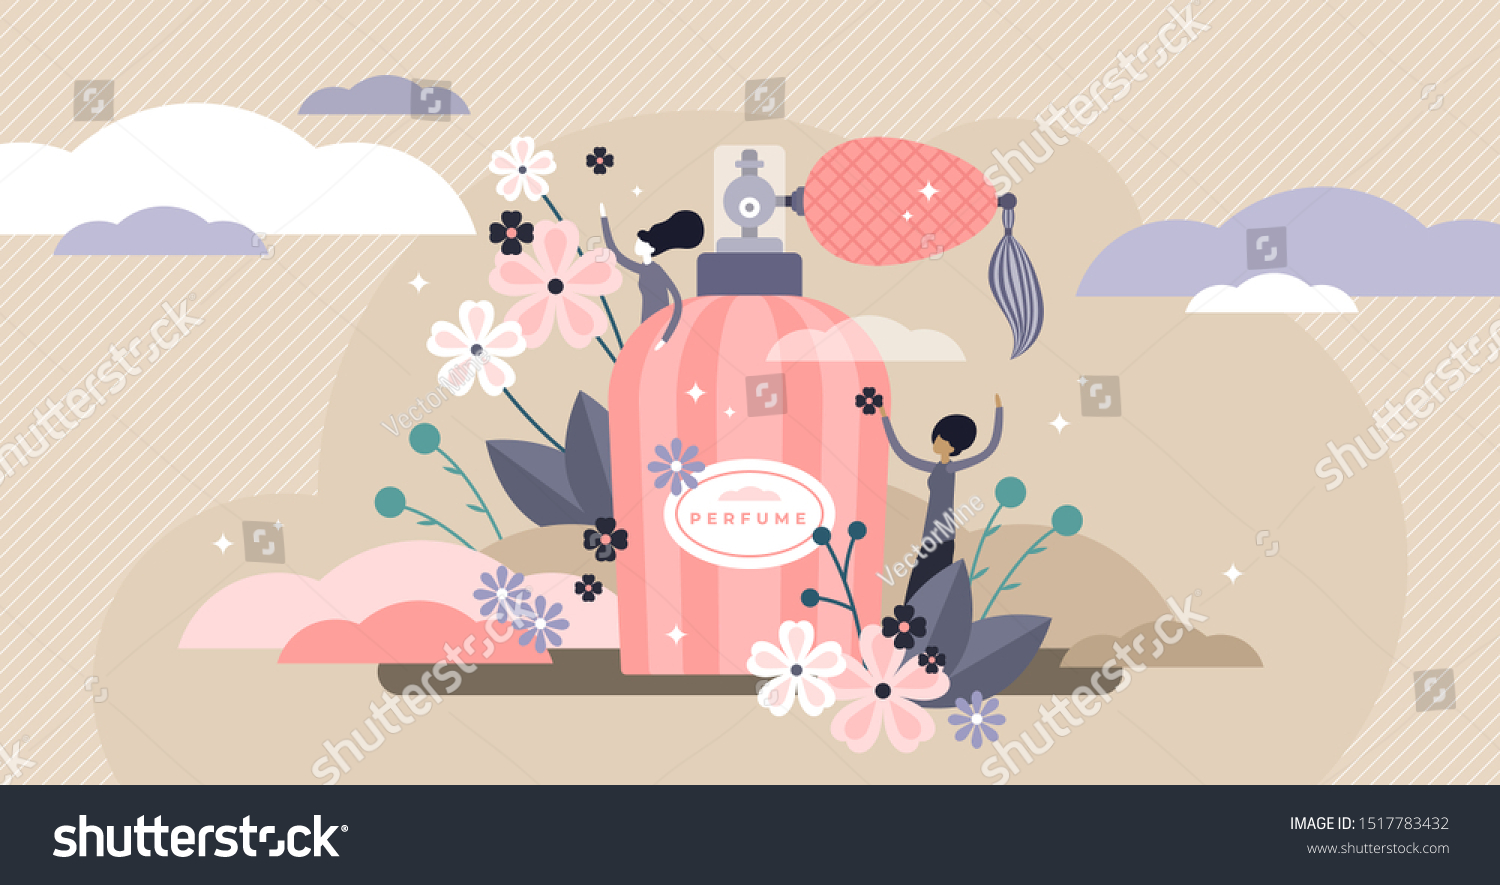 Perfume vector illustration. Flat tiny aroma spray product persons concept. Vintage bottle and hygiene fragrance for good body smell. Liquid female fresh flower cosmetics deodorant as elegant gift. #1517783432